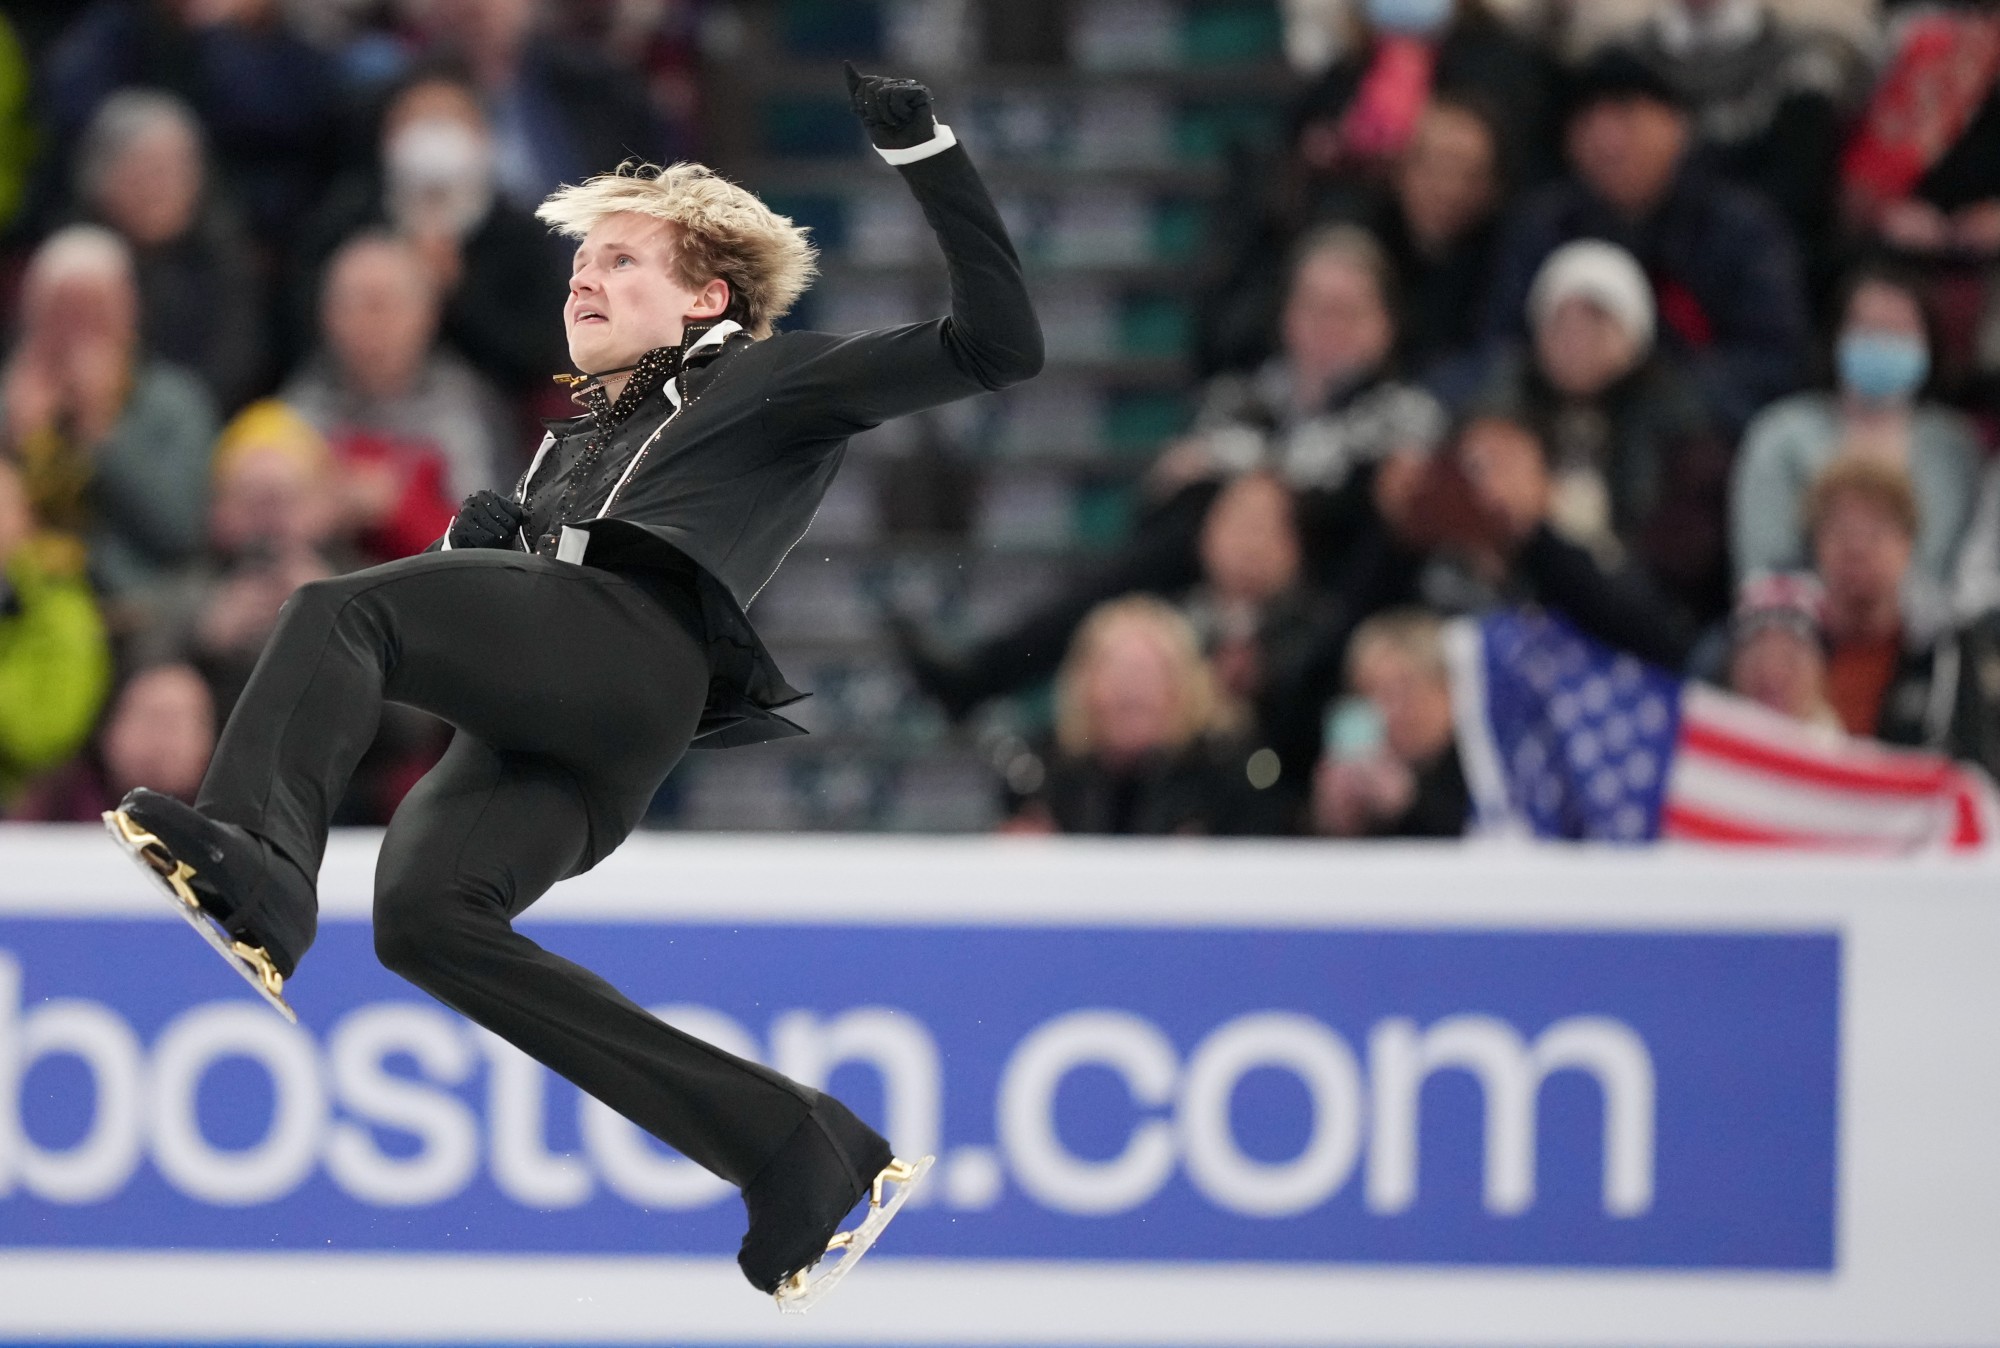 Watch an American Skater Win the World Figure Skating Championships in Stunning Fashion – Mother Jones